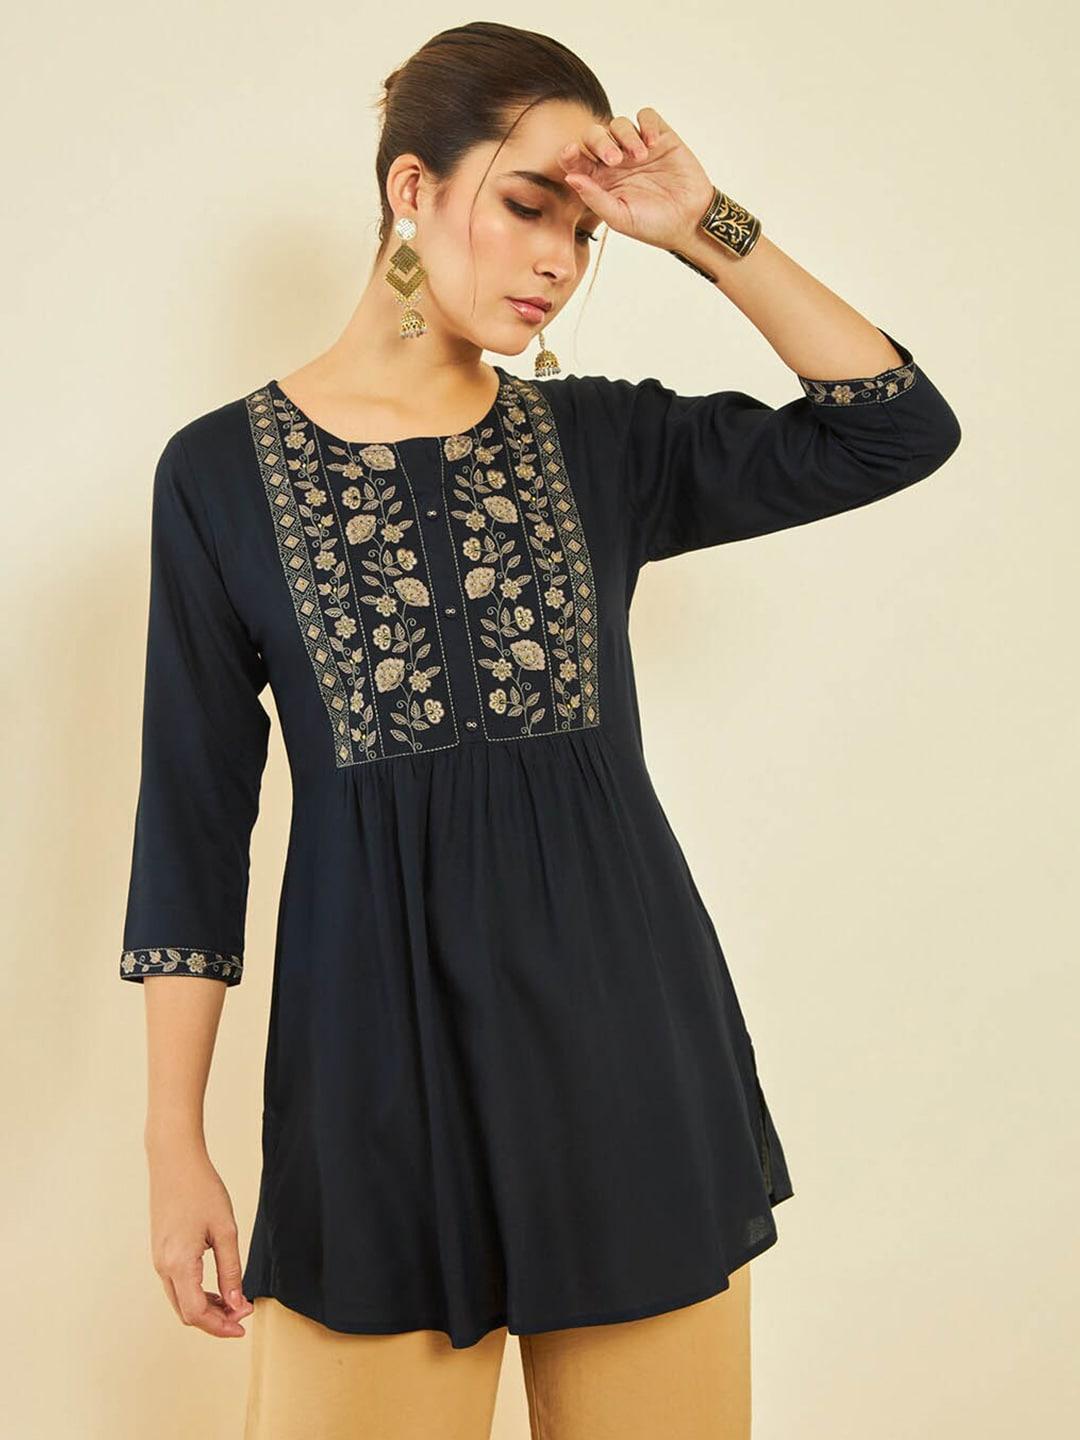 soch-floral-print-round-neck-three-quarter-sleeves-pleated-tunic